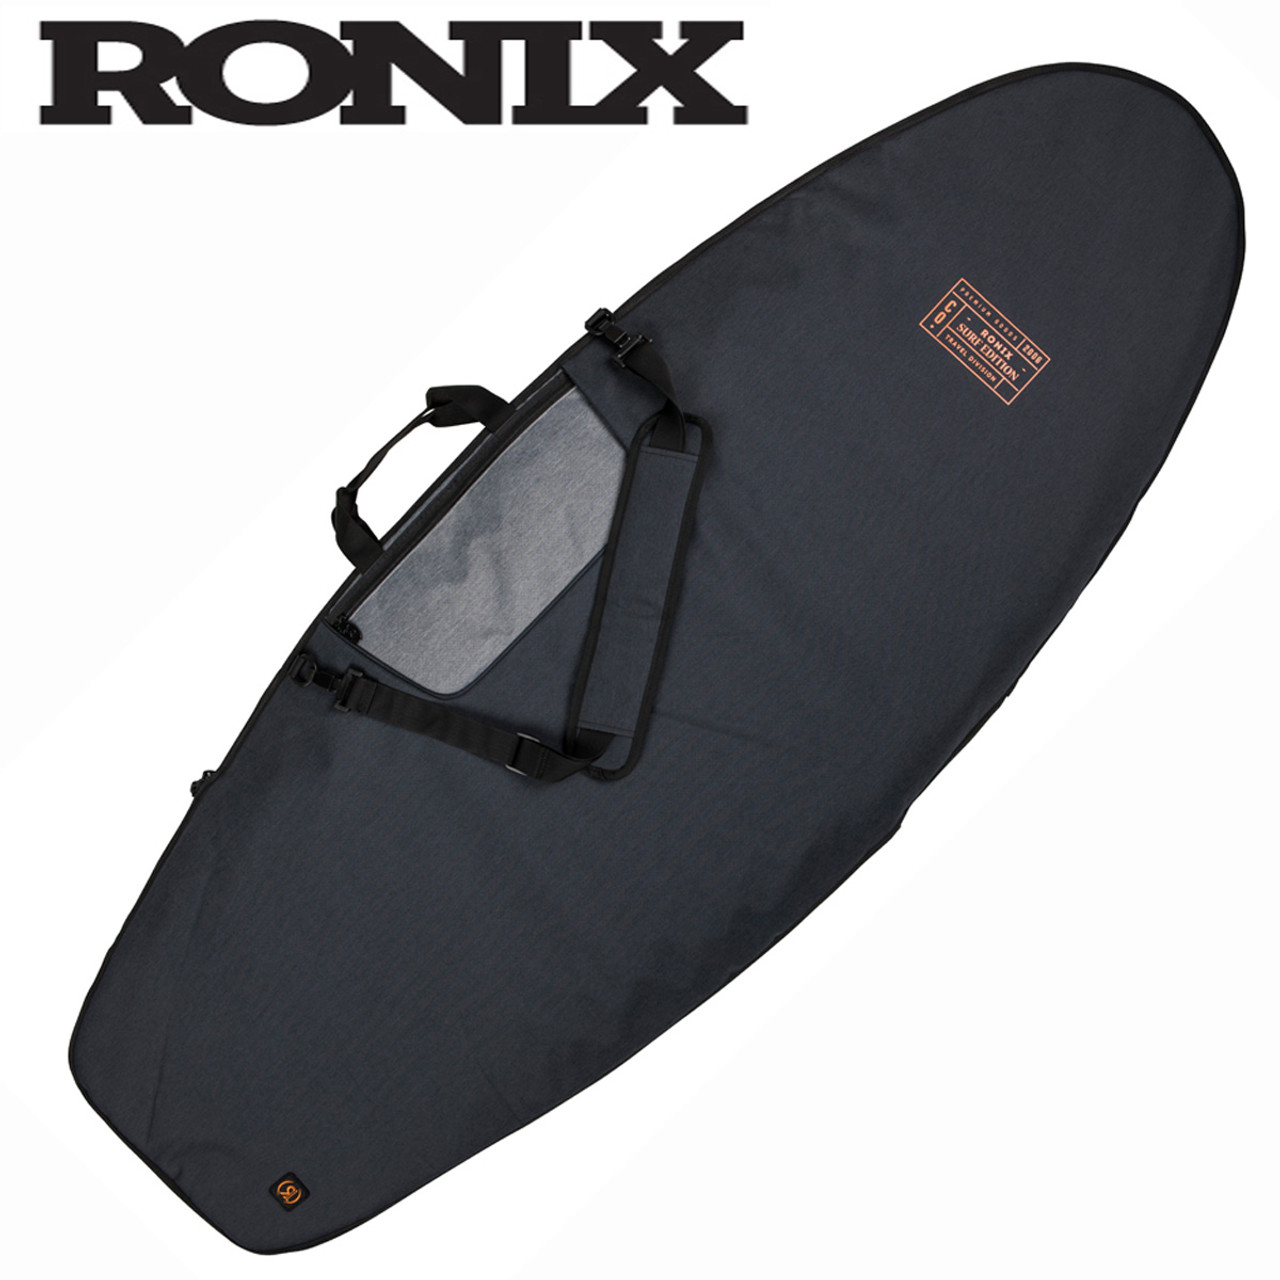 Ronix Dempsey Surf Bag Fits up to 5'9" Charcoal / Orange